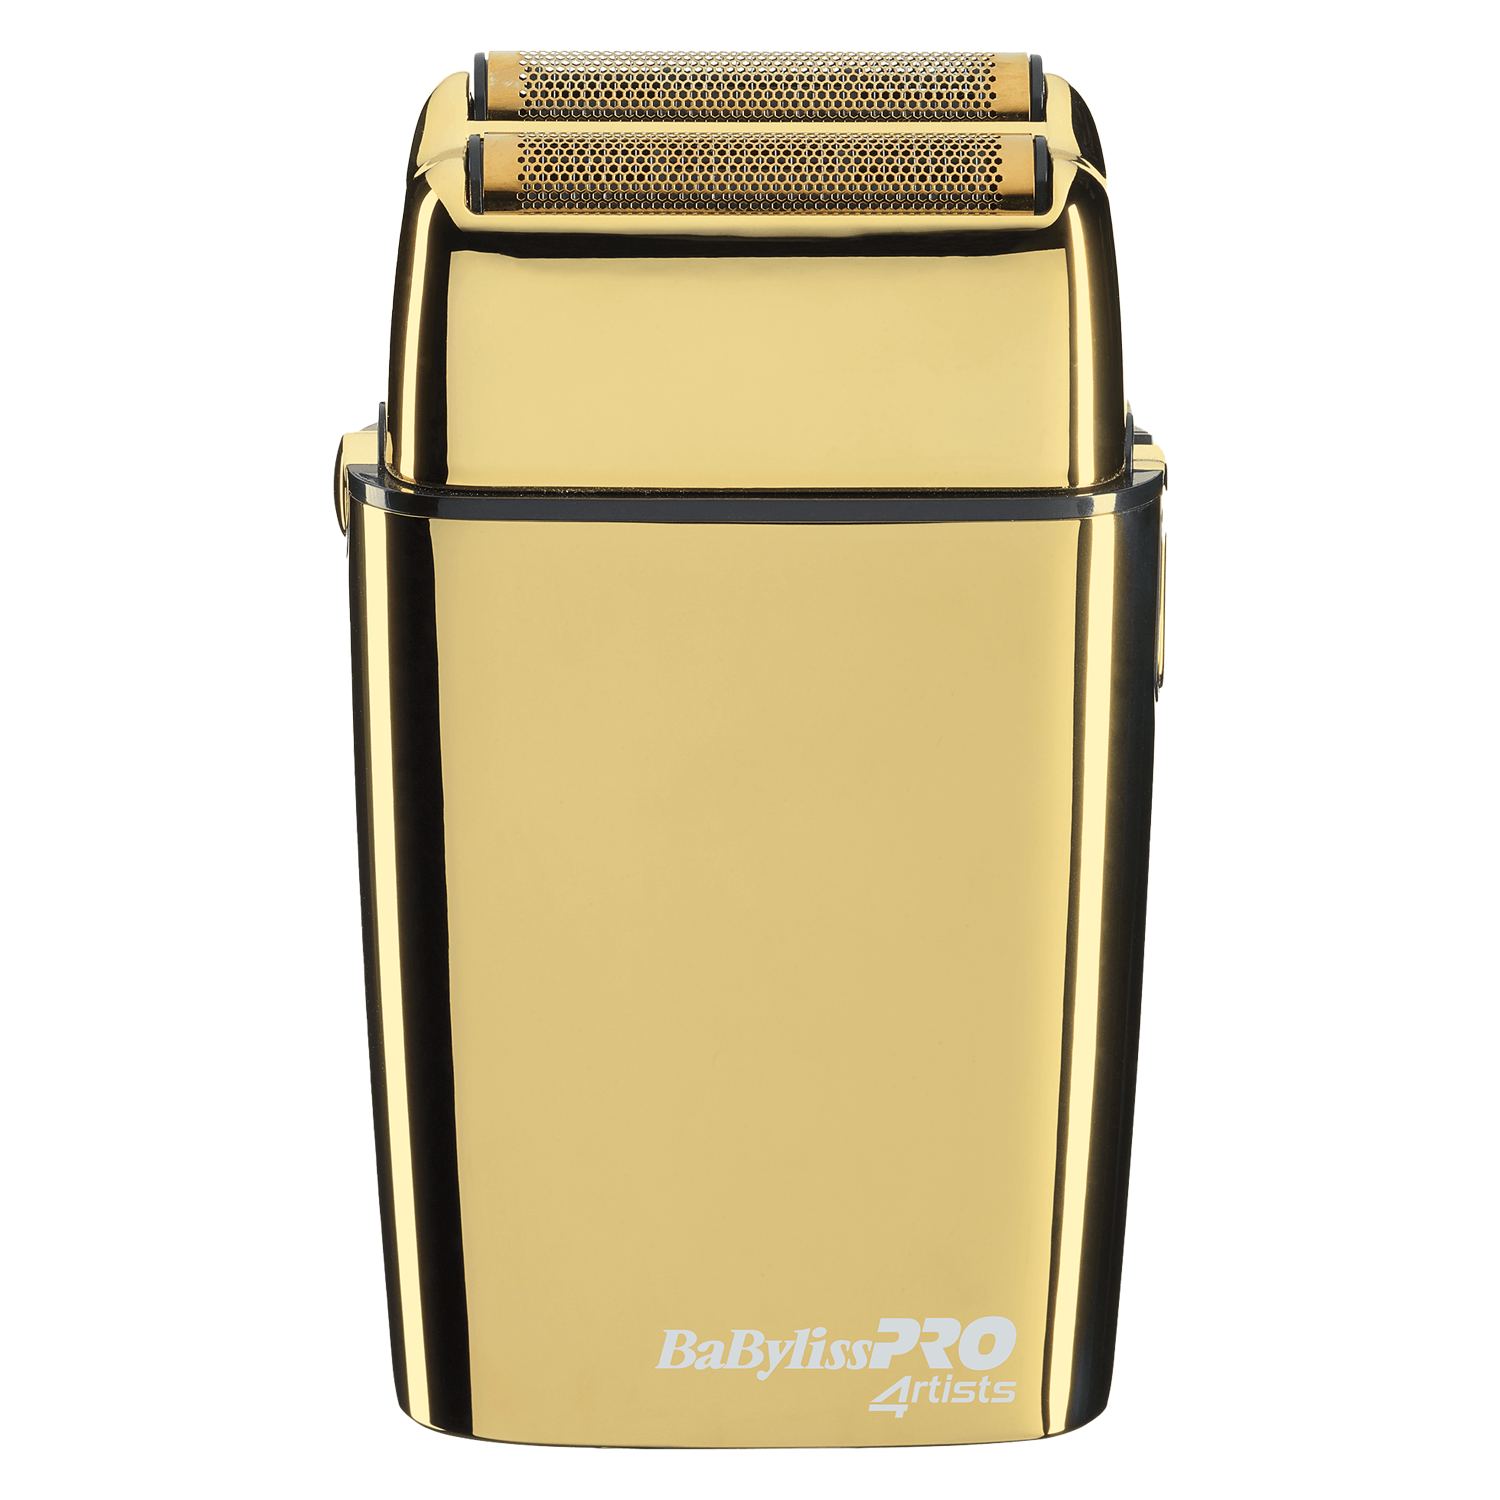 Product image from BaByliss Pro - Professionelle Doppel Folienrasierer Gold 4Artists